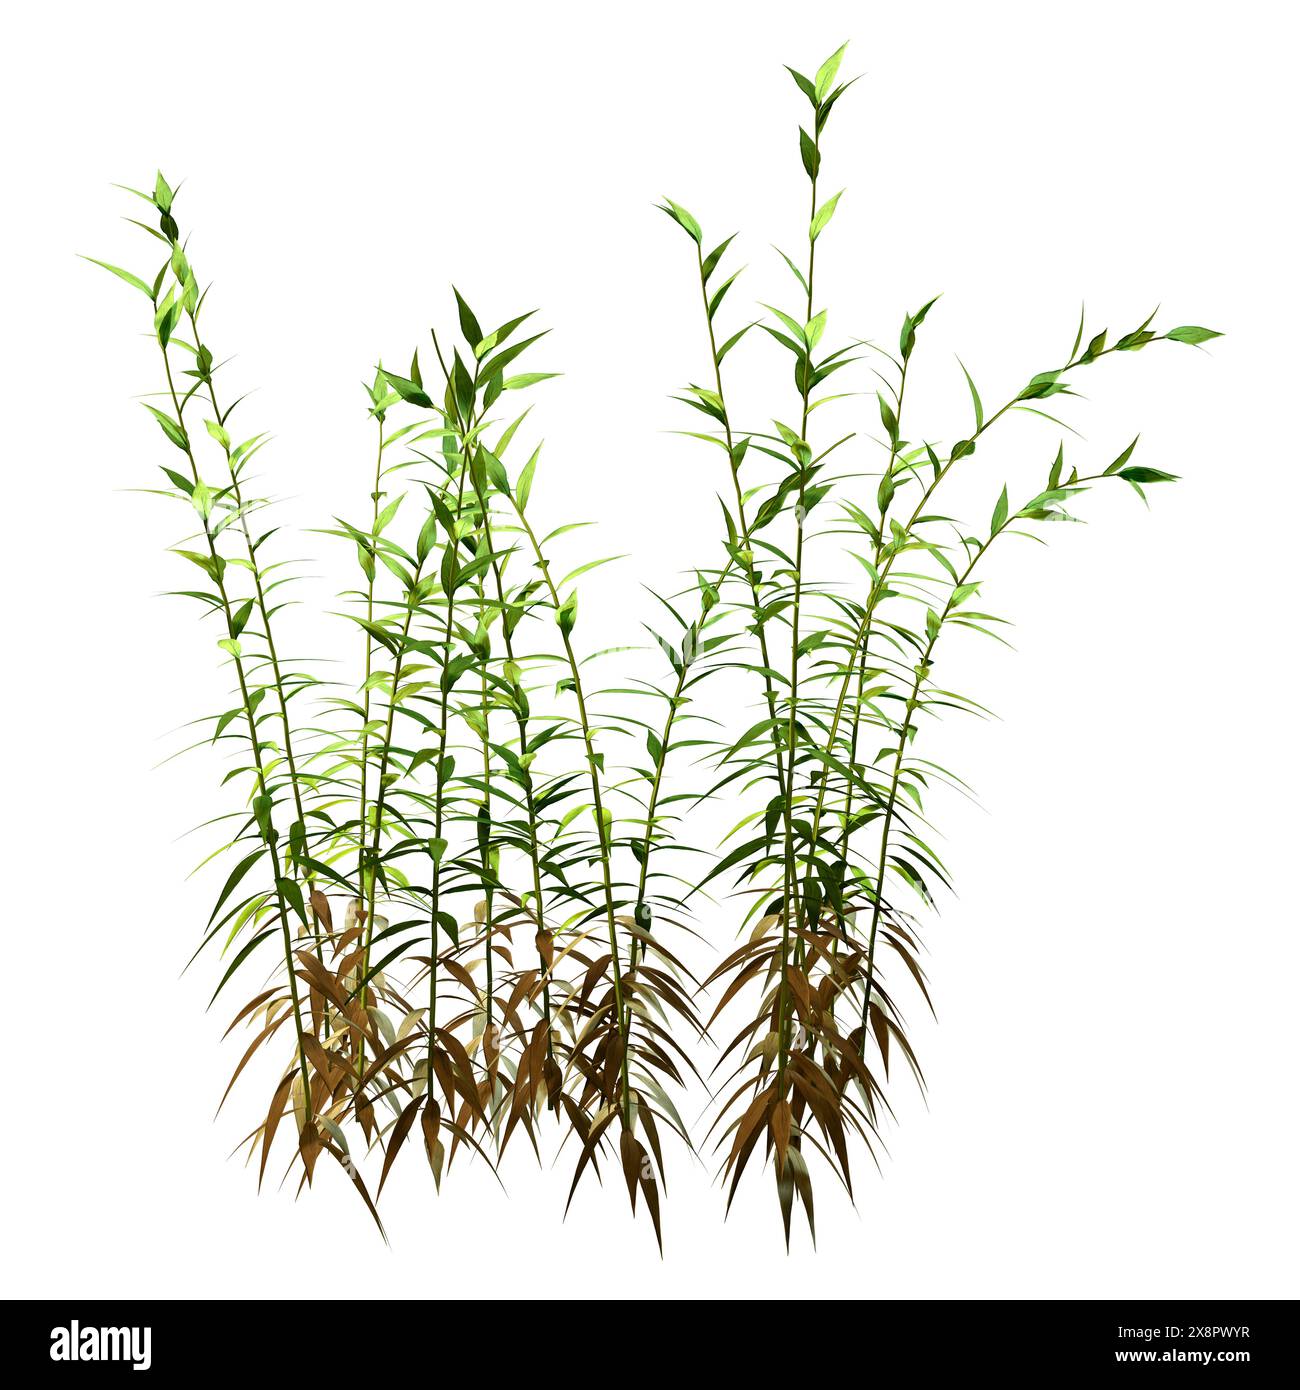 3D rendering of Solidago canadensis or Canadian goldenrod plants isolated on white background Stock Photo